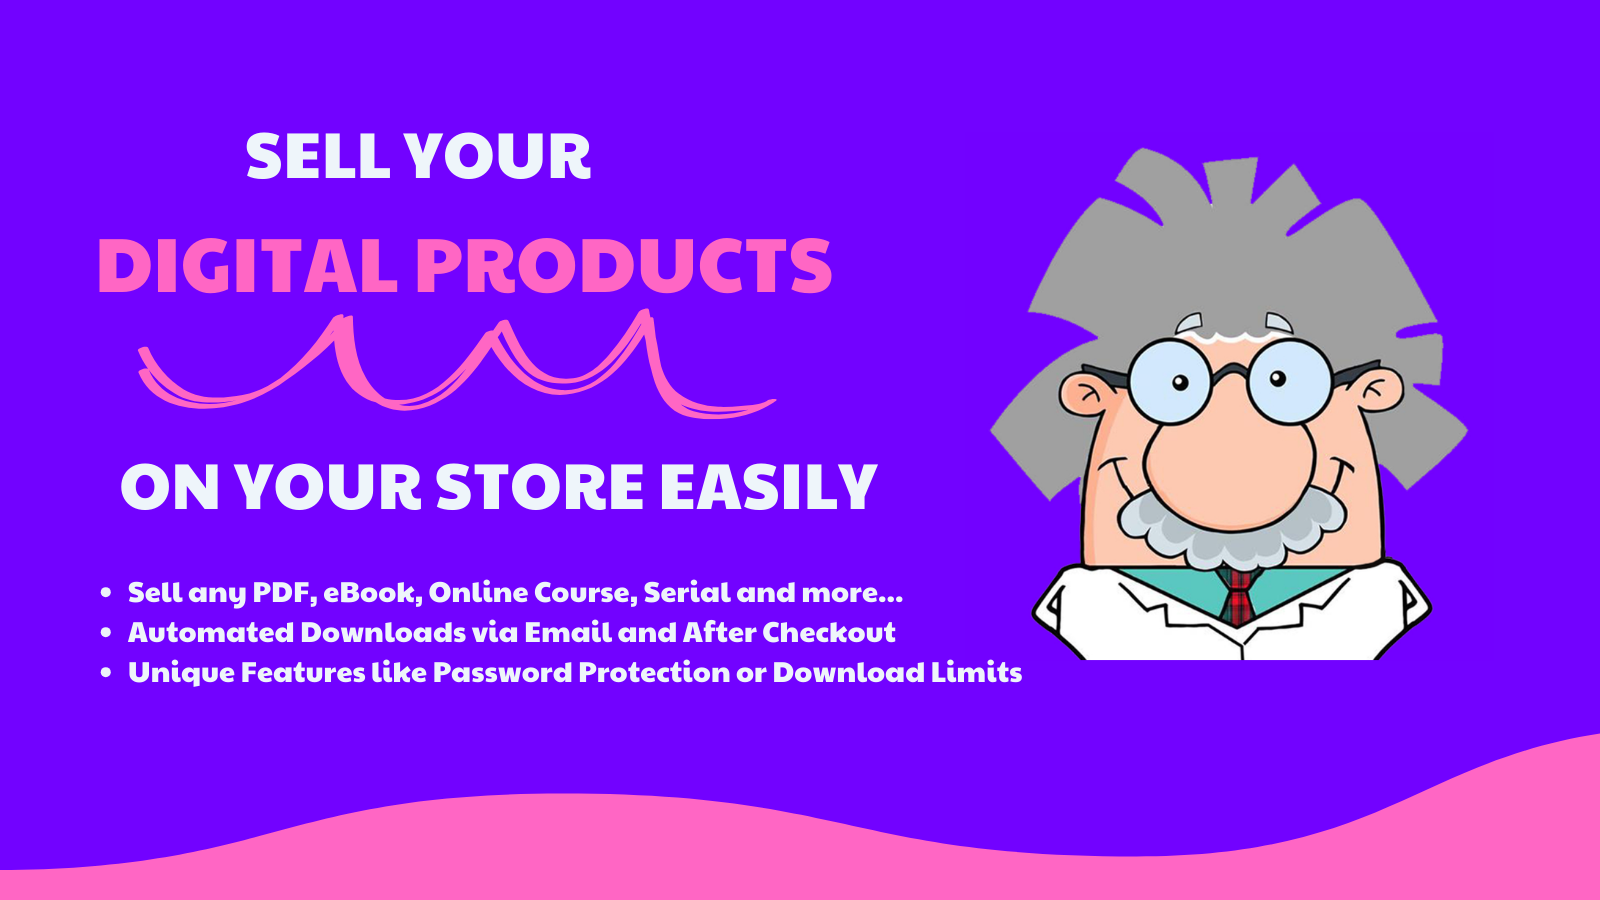 Sell your digital products on your store easily